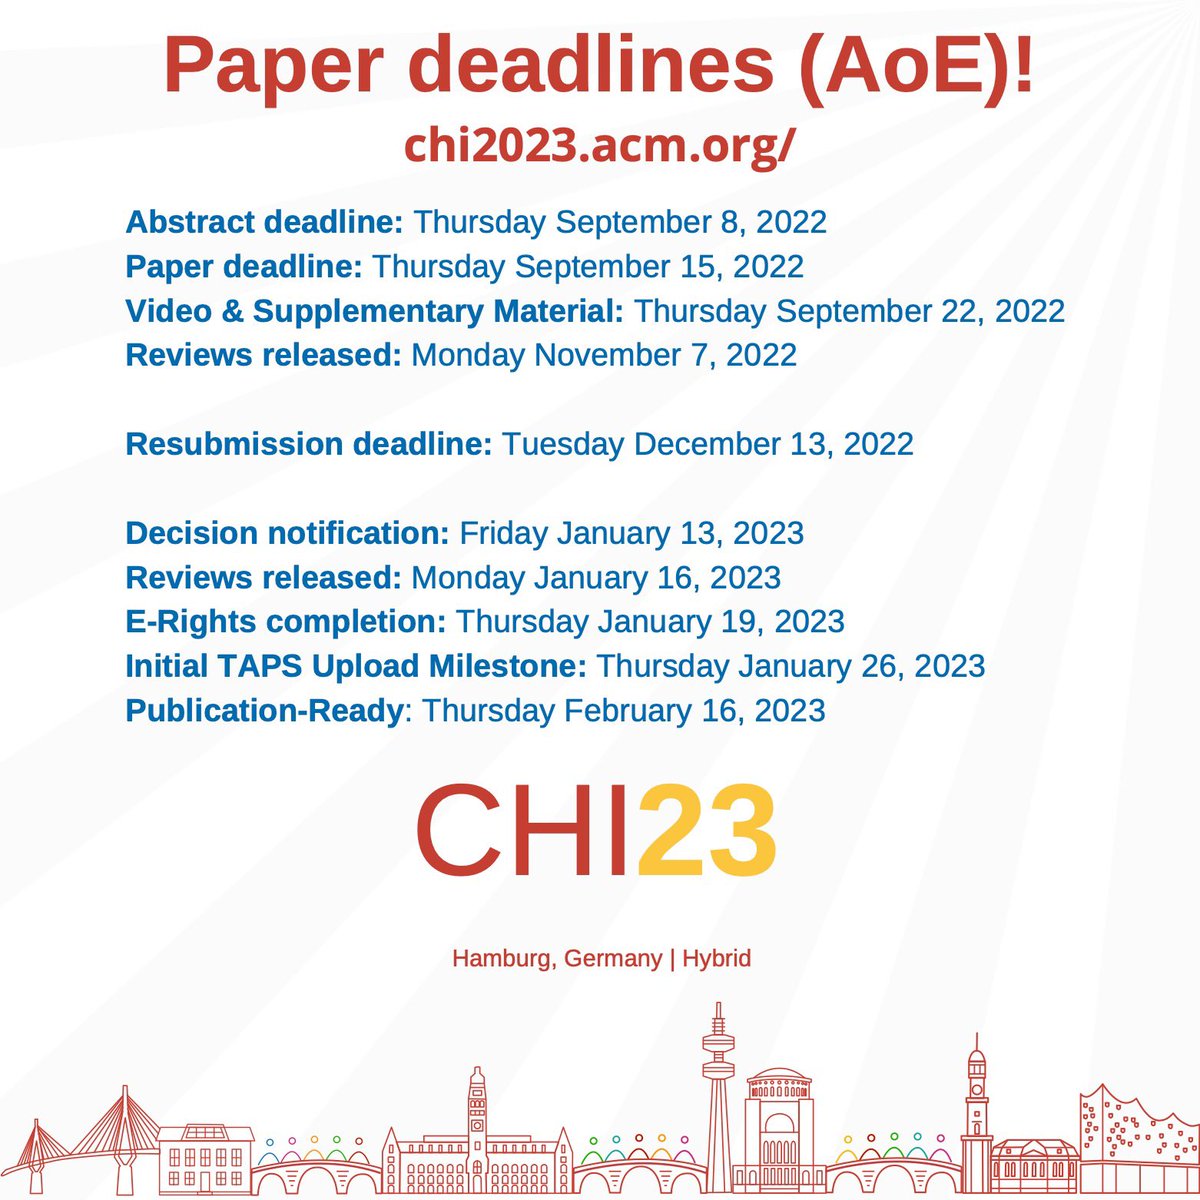 📣 Around a month to go before the CHI’23 Paper deadline: Thursday September 15, 2022 (AoE) ⏳ #reCHInnecting #chi2023 #sigchi ps. don’t forget to take care of yourself as you sprint. 🧘‍♀️ 🔗 chi2023.acm.org/for-authors/pa…